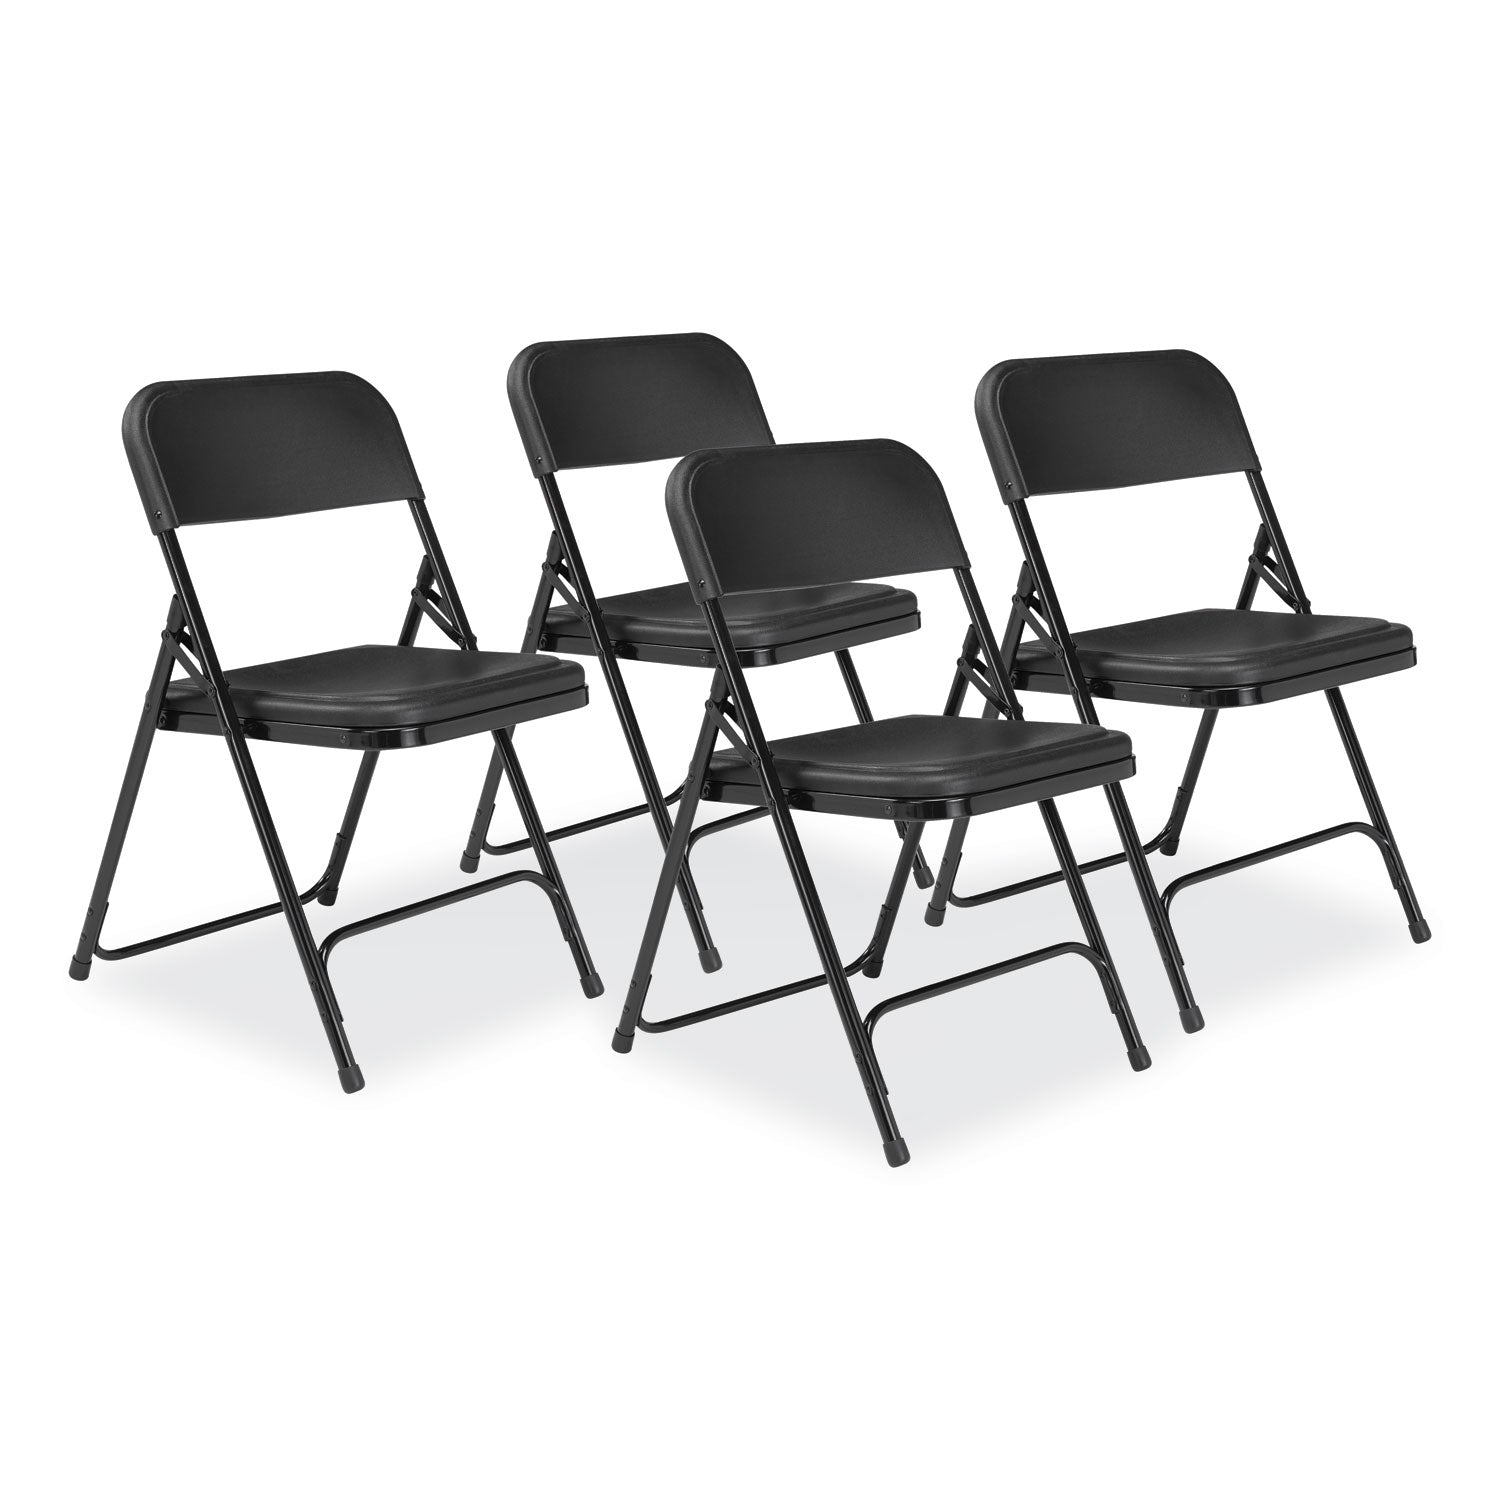 800-series-plastic-folding-chair-supports-500lb-18-seat-height-black-seat-back-black-base-4-ct-ships-in-1-3-bus-days_nps810 - 1